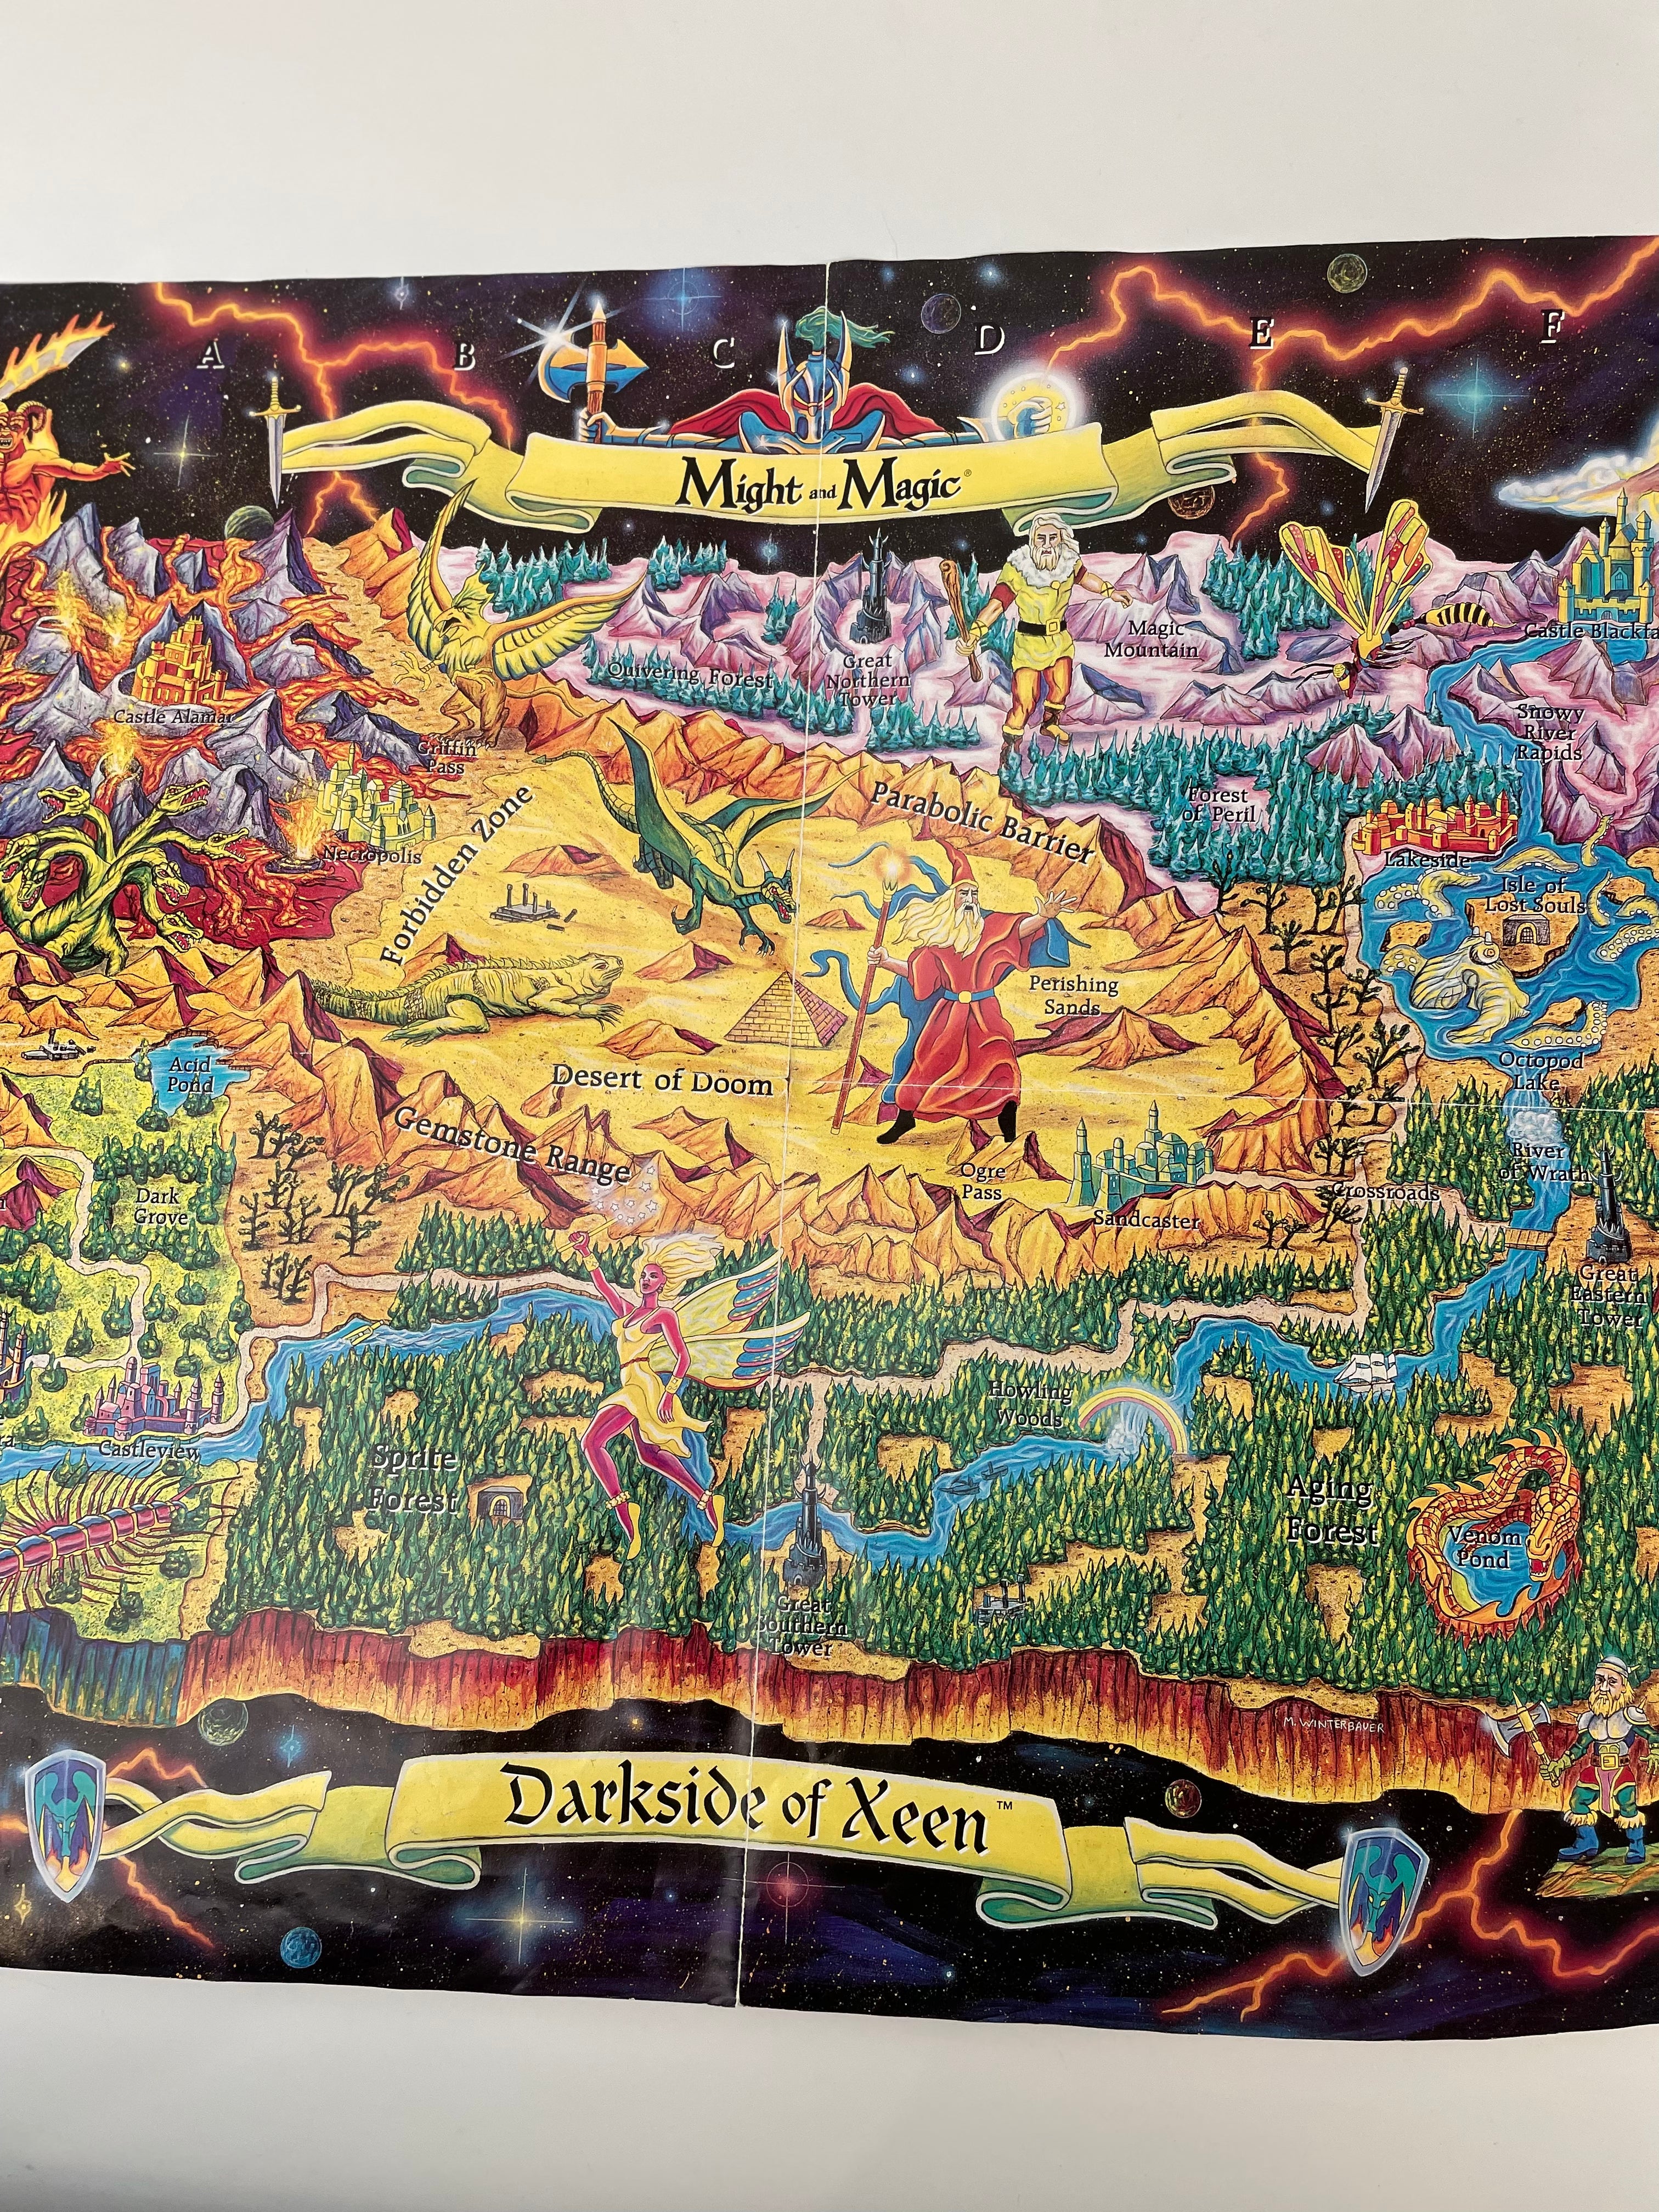 Might and Magic: Darkside of Xeen!